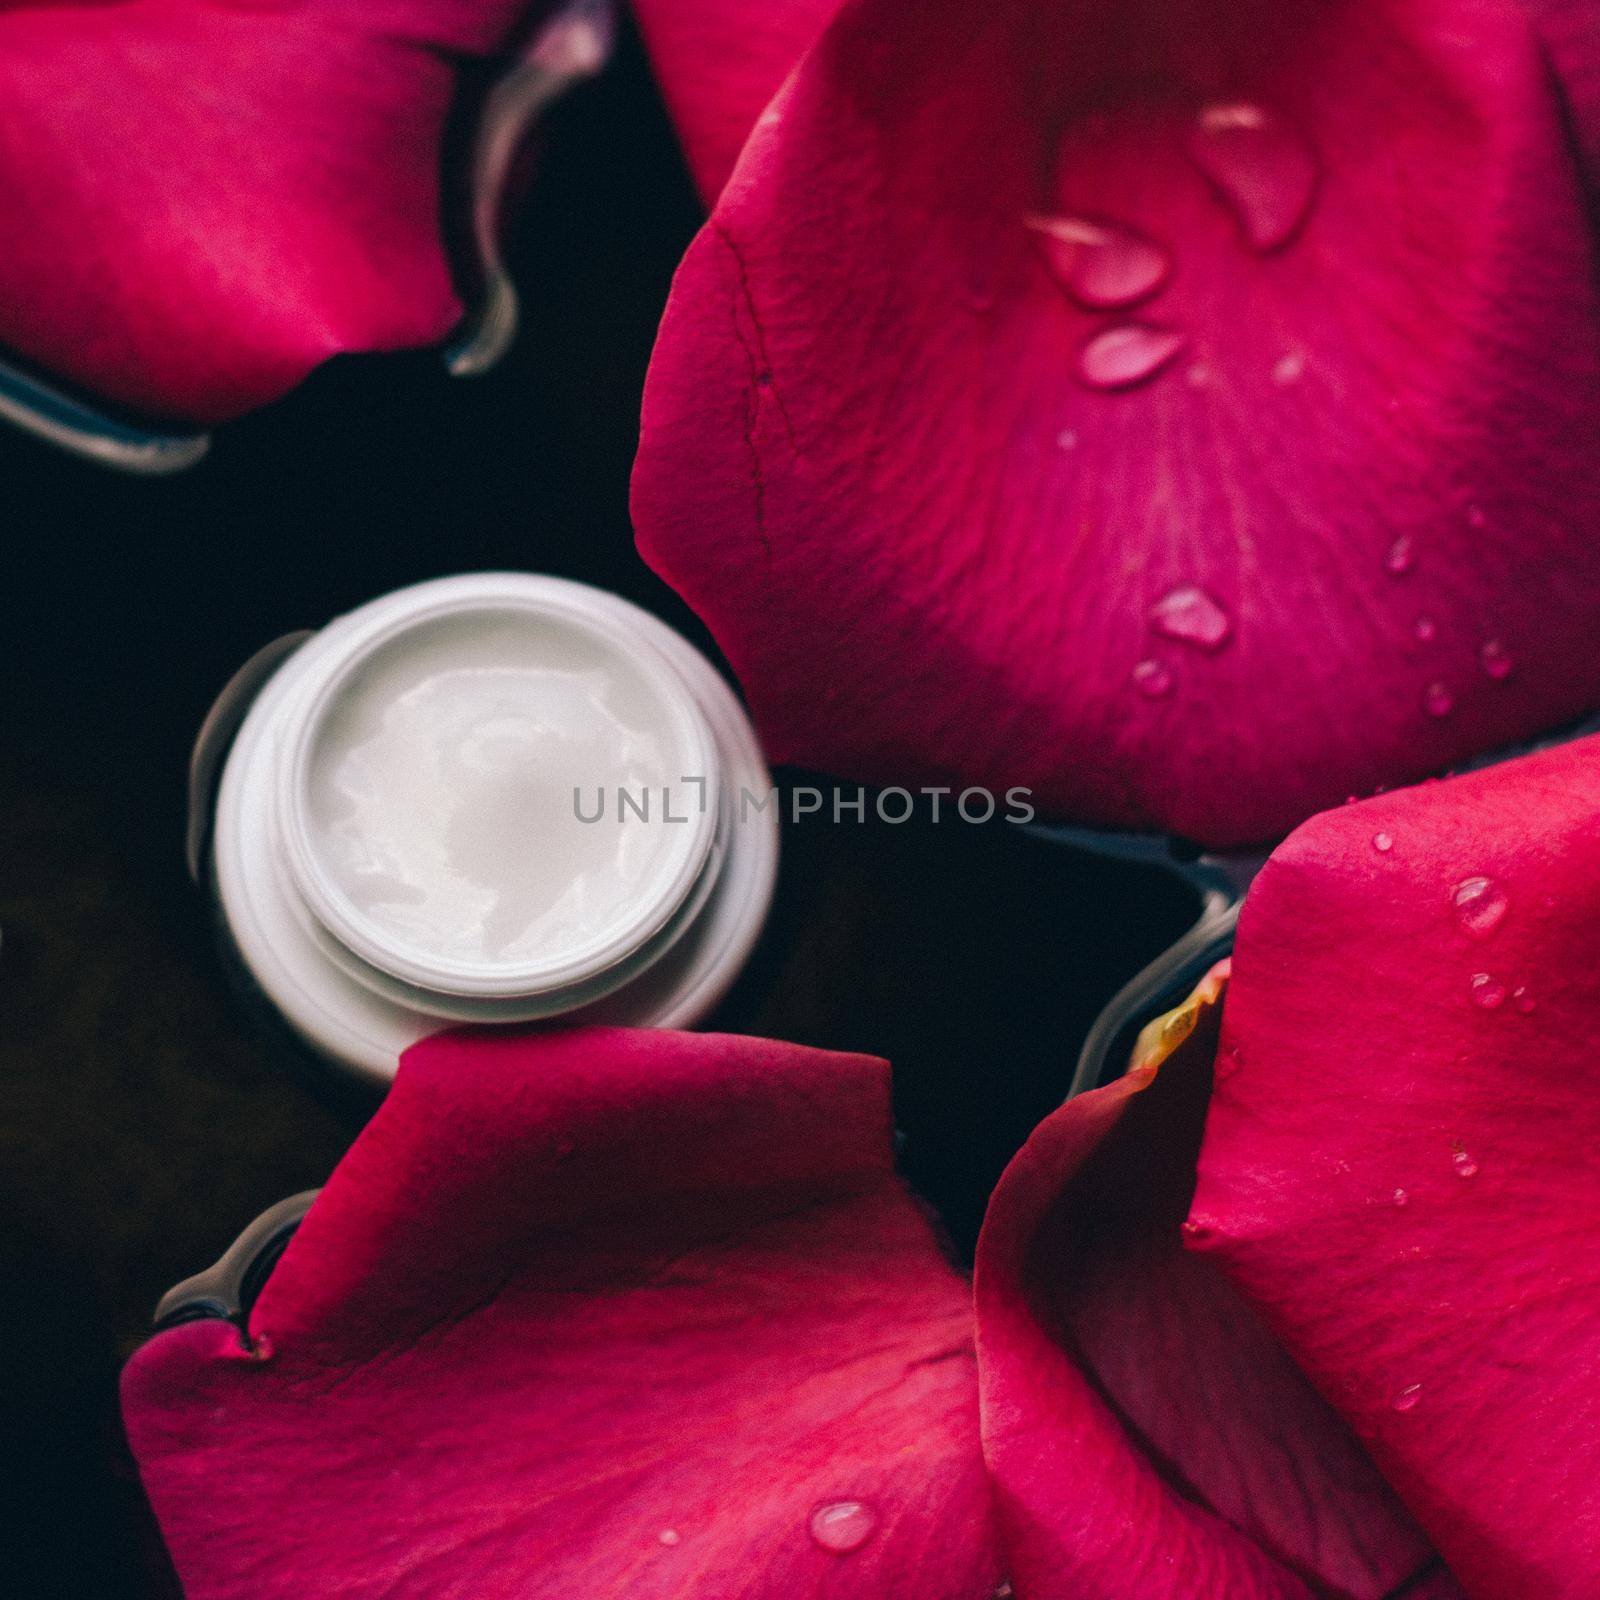 beauty cream jar and flower petals - cosmetics with flowers styled concept, elegant visuals